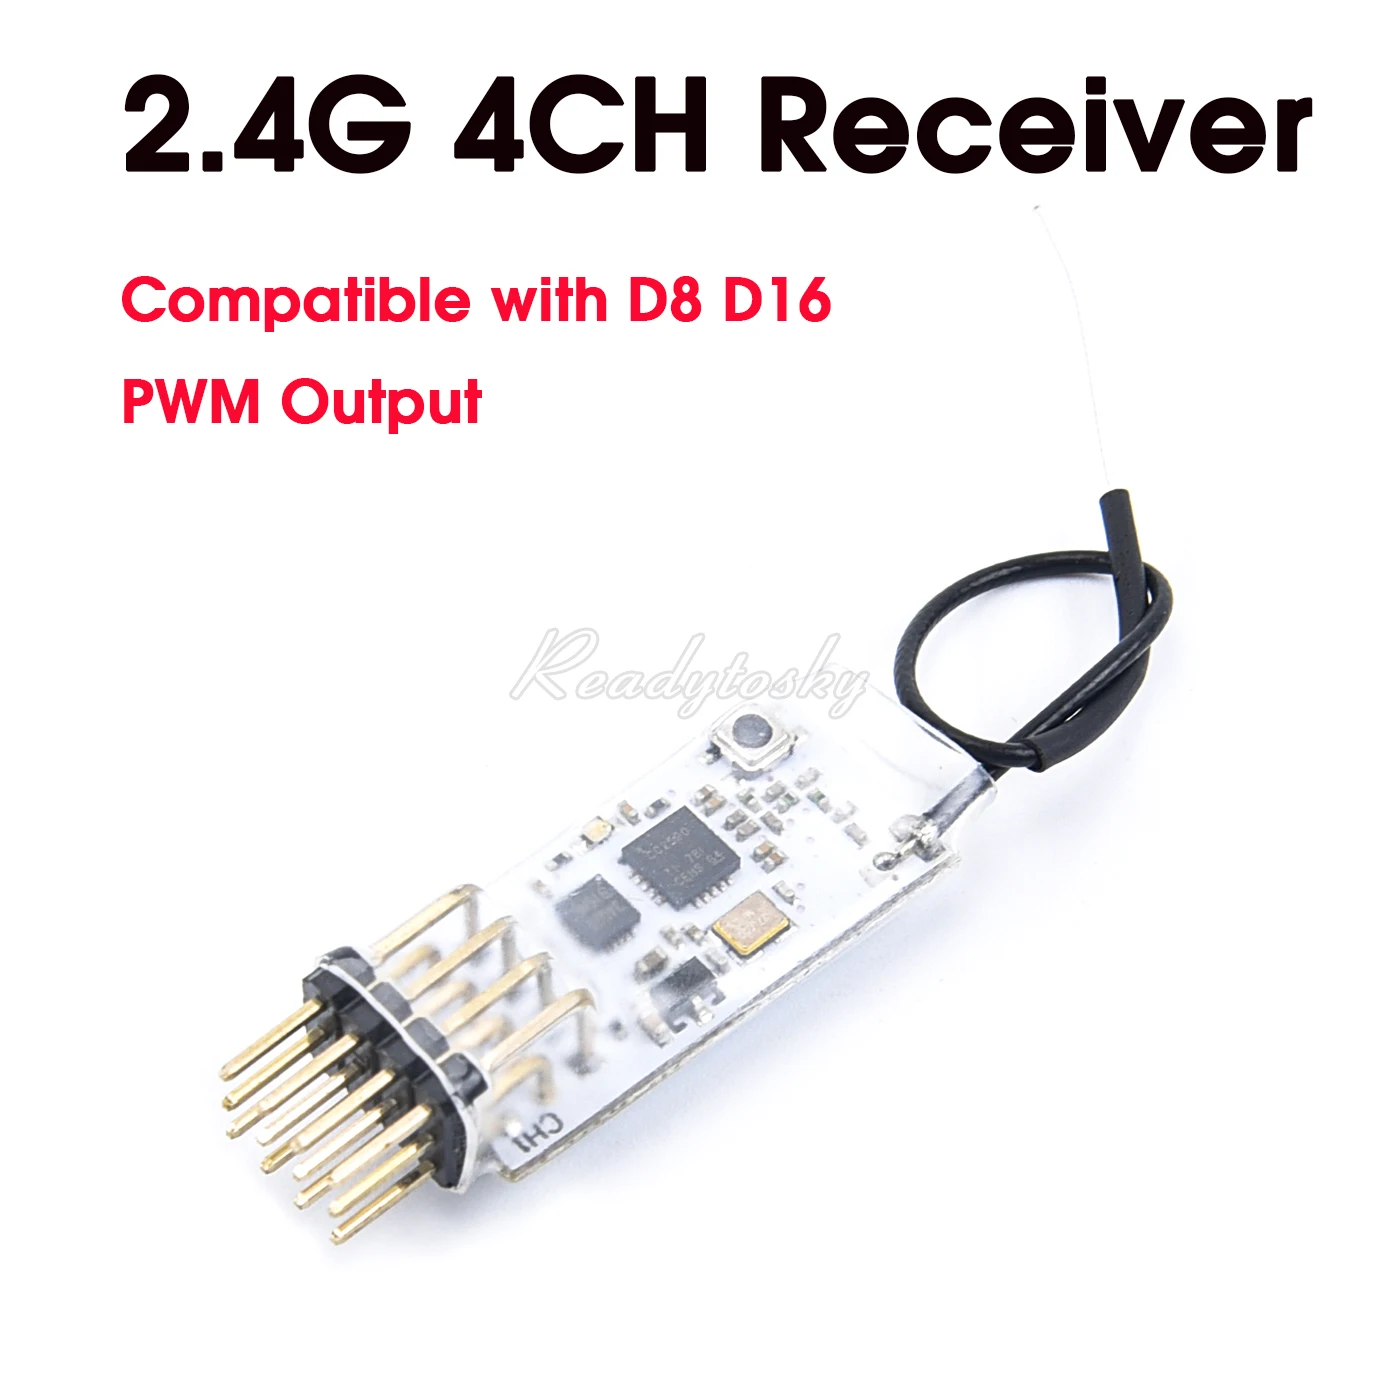 

Mini 2.4G 4CH Receiver PWM Output Compatible with D8 D16 for FRSKY Futaba Jumper T16 X9D RC FPV Racing Drone